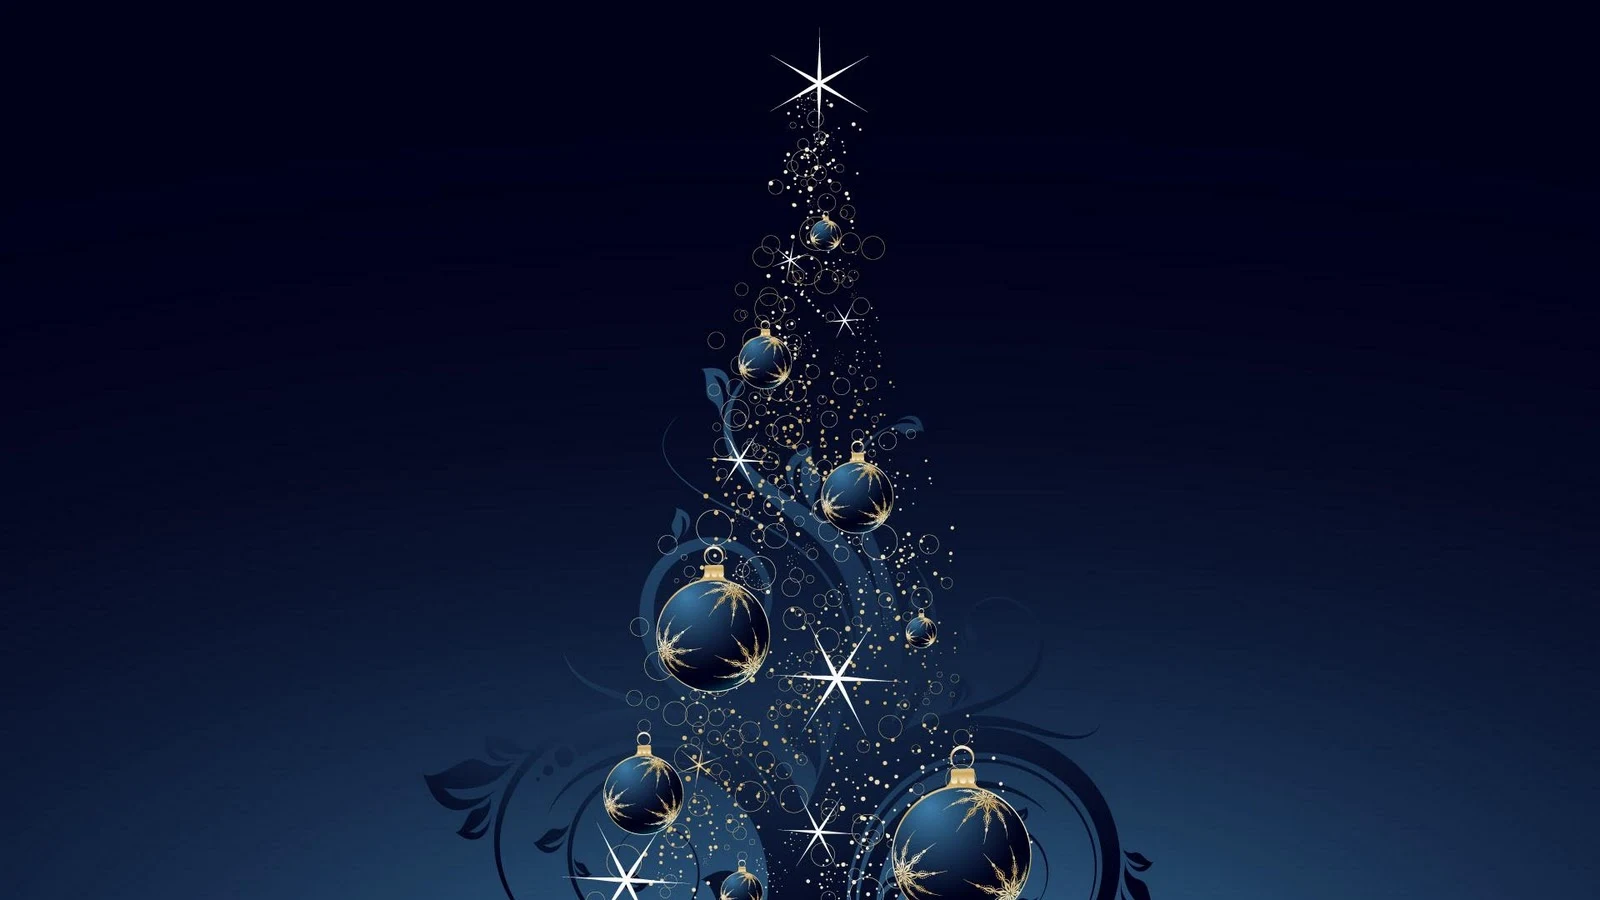 Free Wallpaper: New Year and Christmas Wallpapers